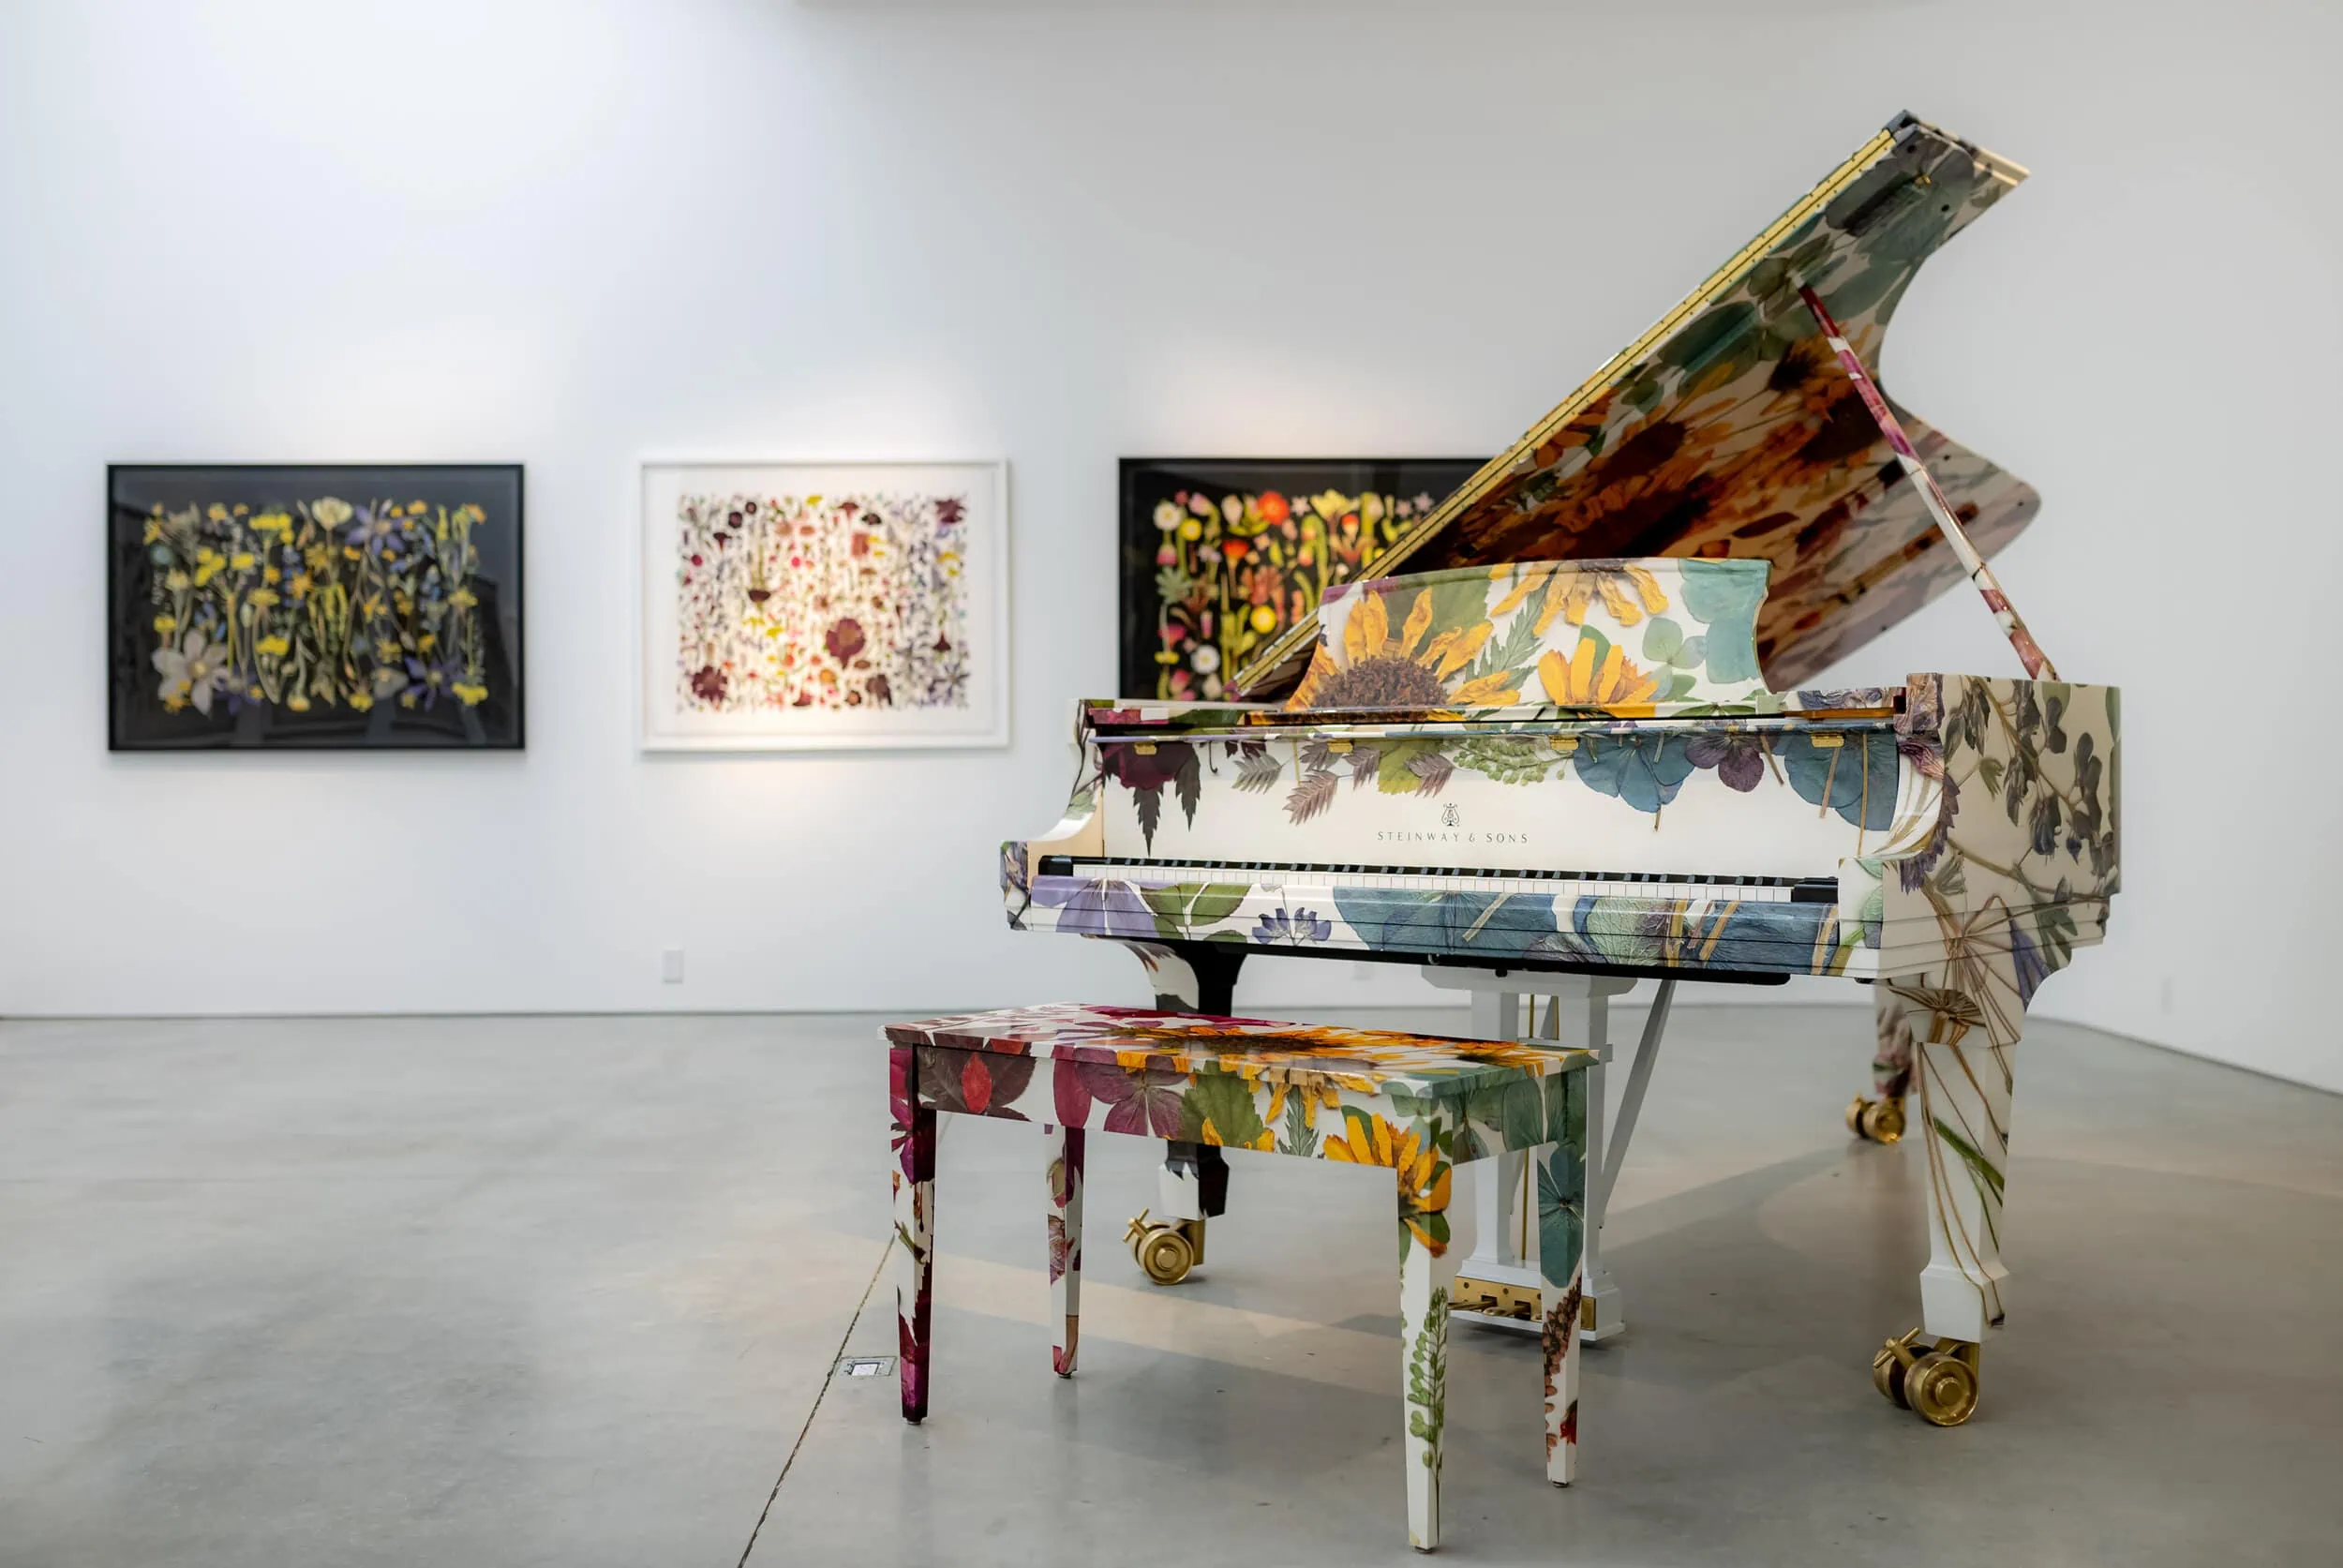 A botanically wrapped Steinway piano in a white gallery with botanical flower prints on the walls